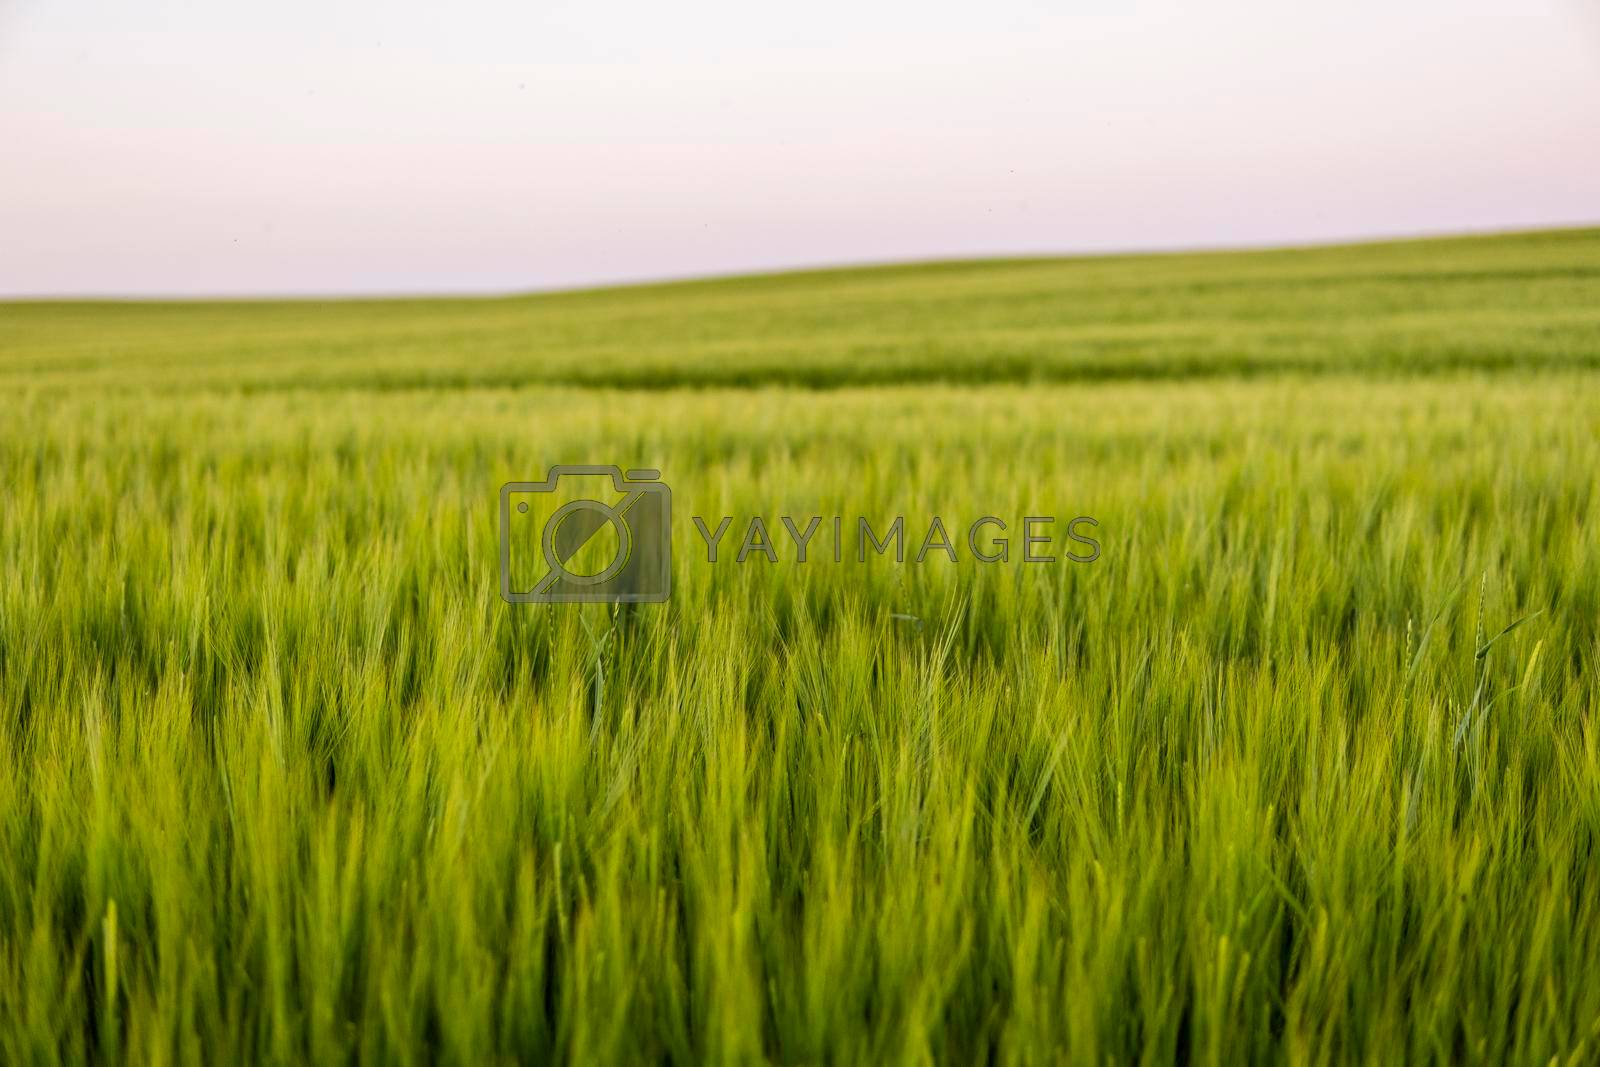 Landscape of fresh young unripe juicy spikelets of barley. Agricultural process. Agriculture